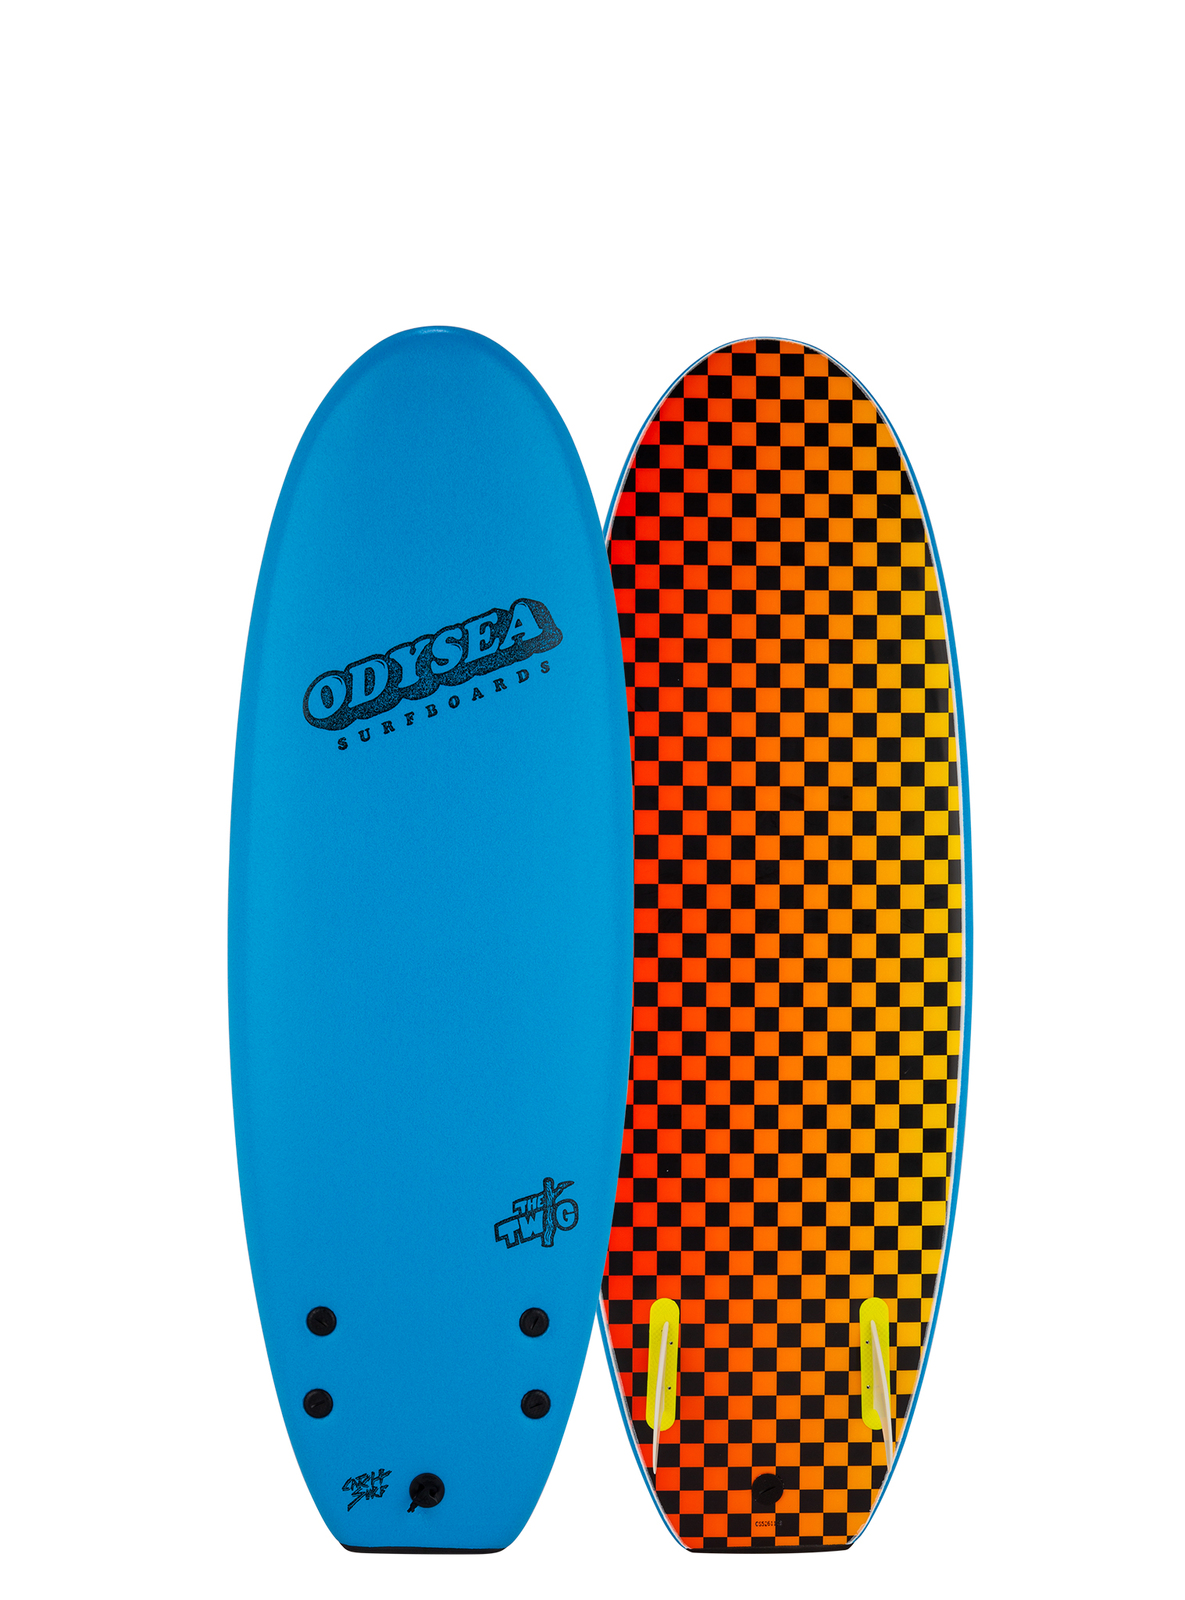 The Catch Surf Odysea - Twig 4'10 Twin Fin. This board is designed